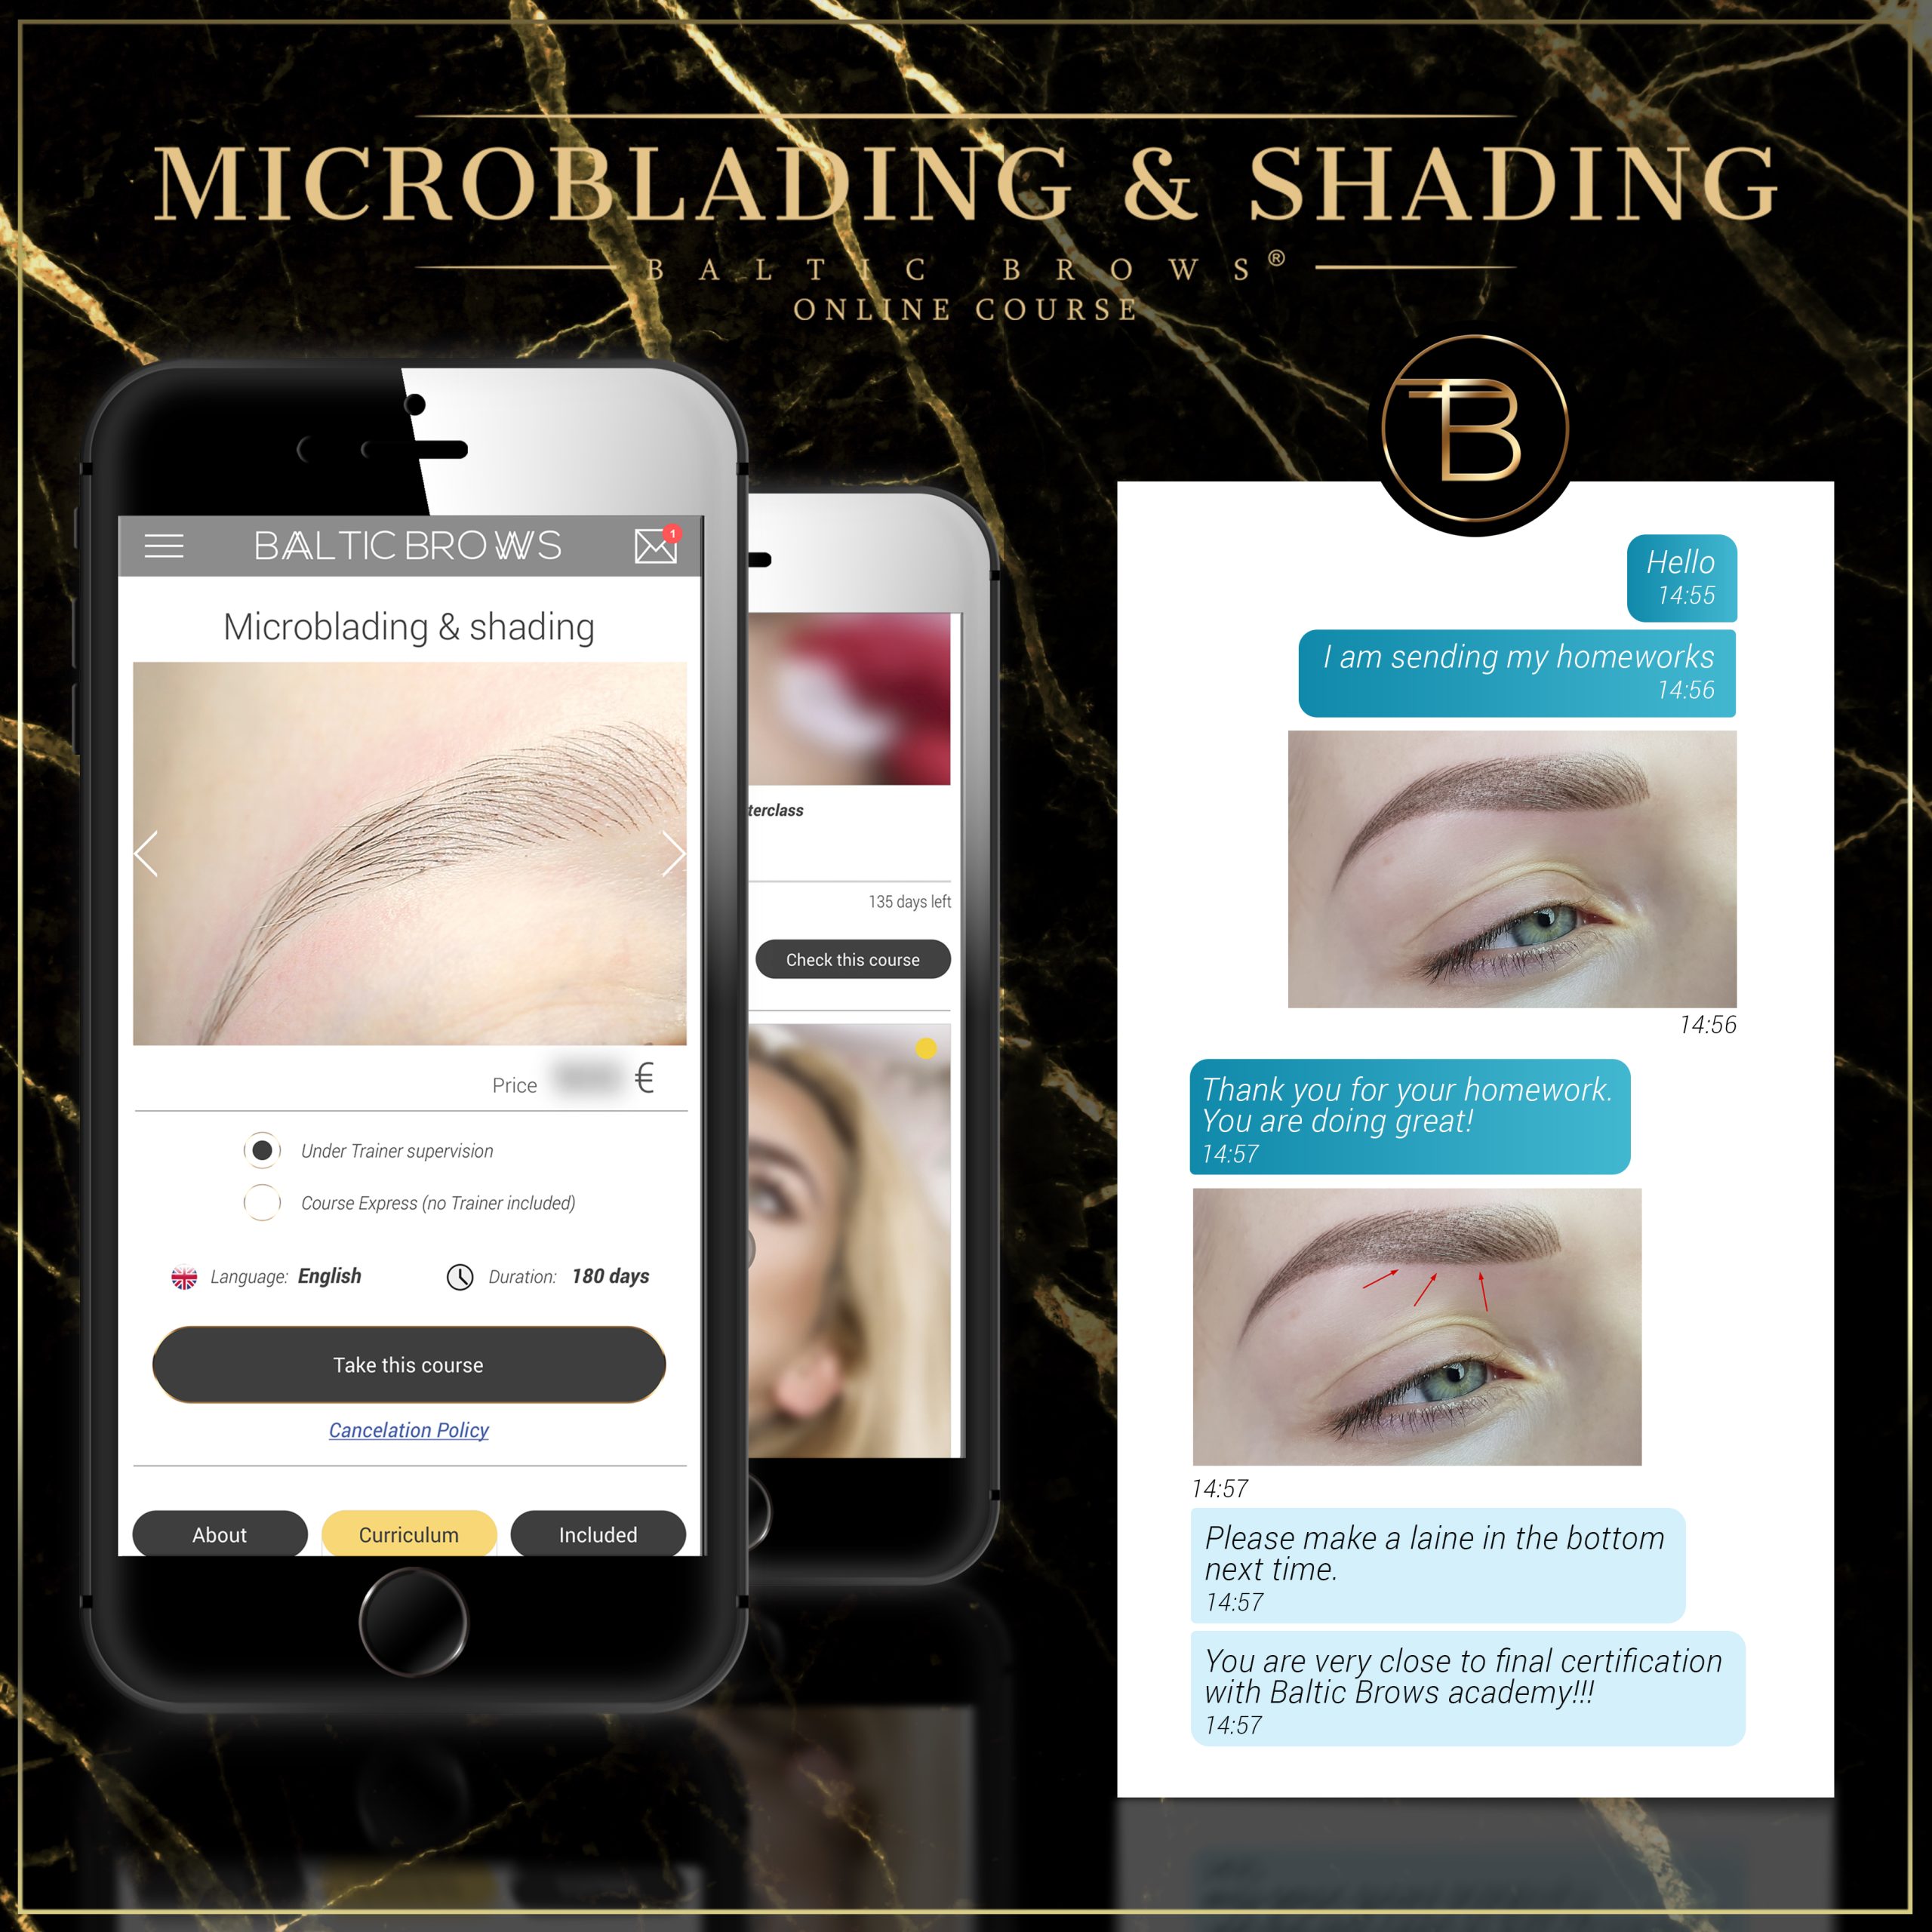 MICROBLADING & SHADING Online Course